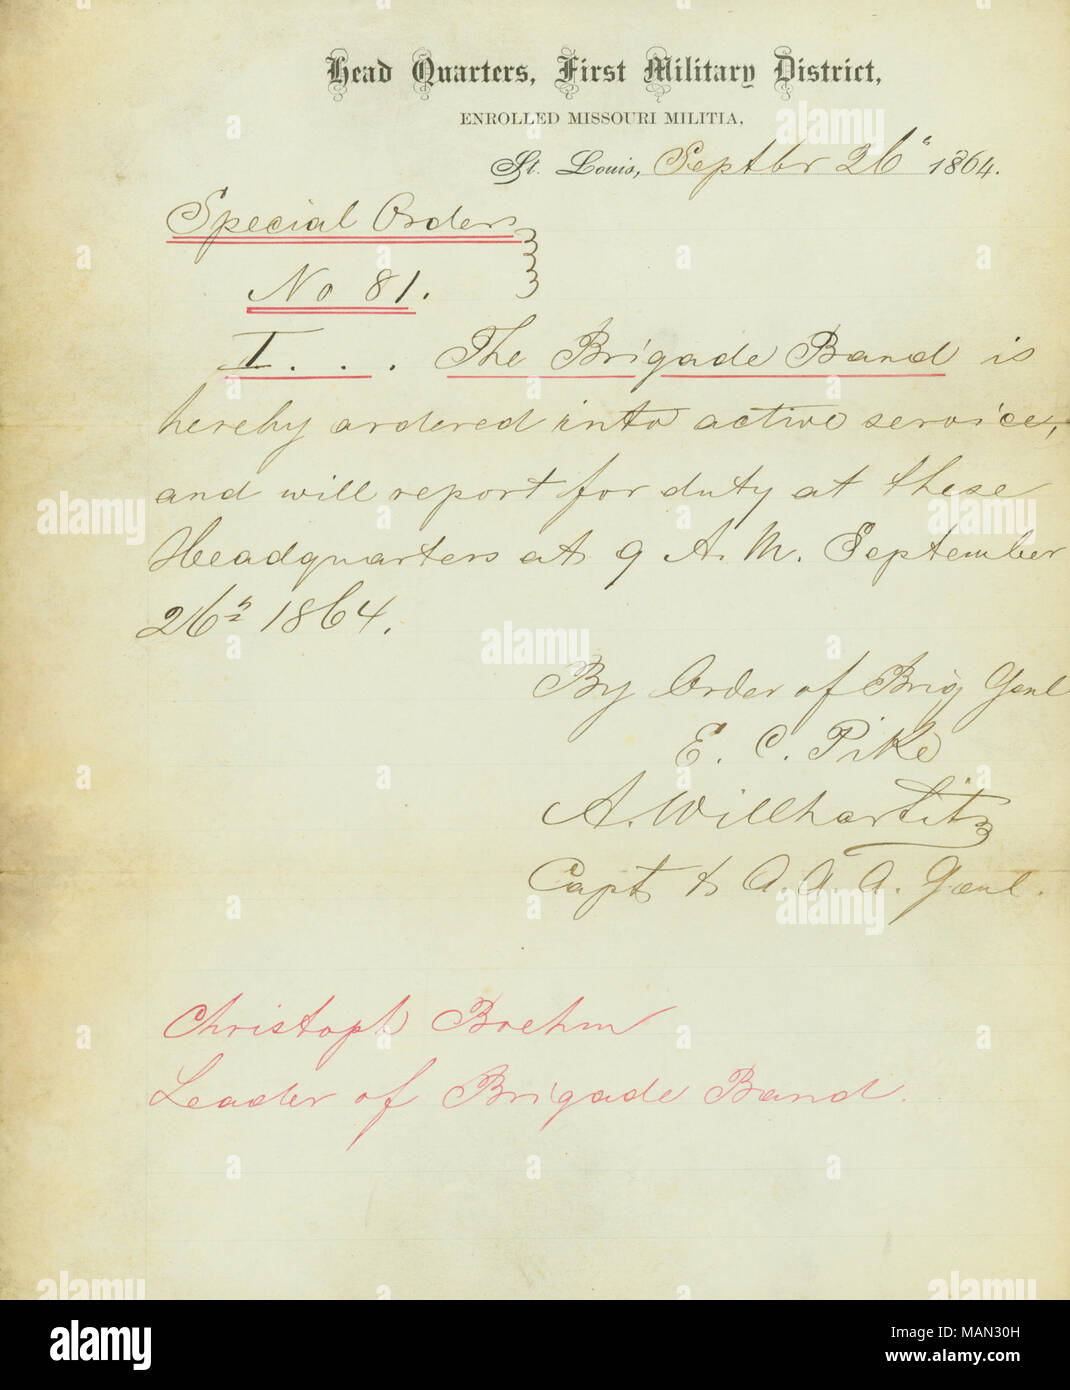 States that the Brigade Band has been ordered into active service. Title: Special Orders, No. 81, Head Quarters, First Military District, Enrolled Missouri Militia, St. Louis, signed by A. Willharditz, September 26, 1864  . 26 September 1864. Willharditz, A. Stock Photo